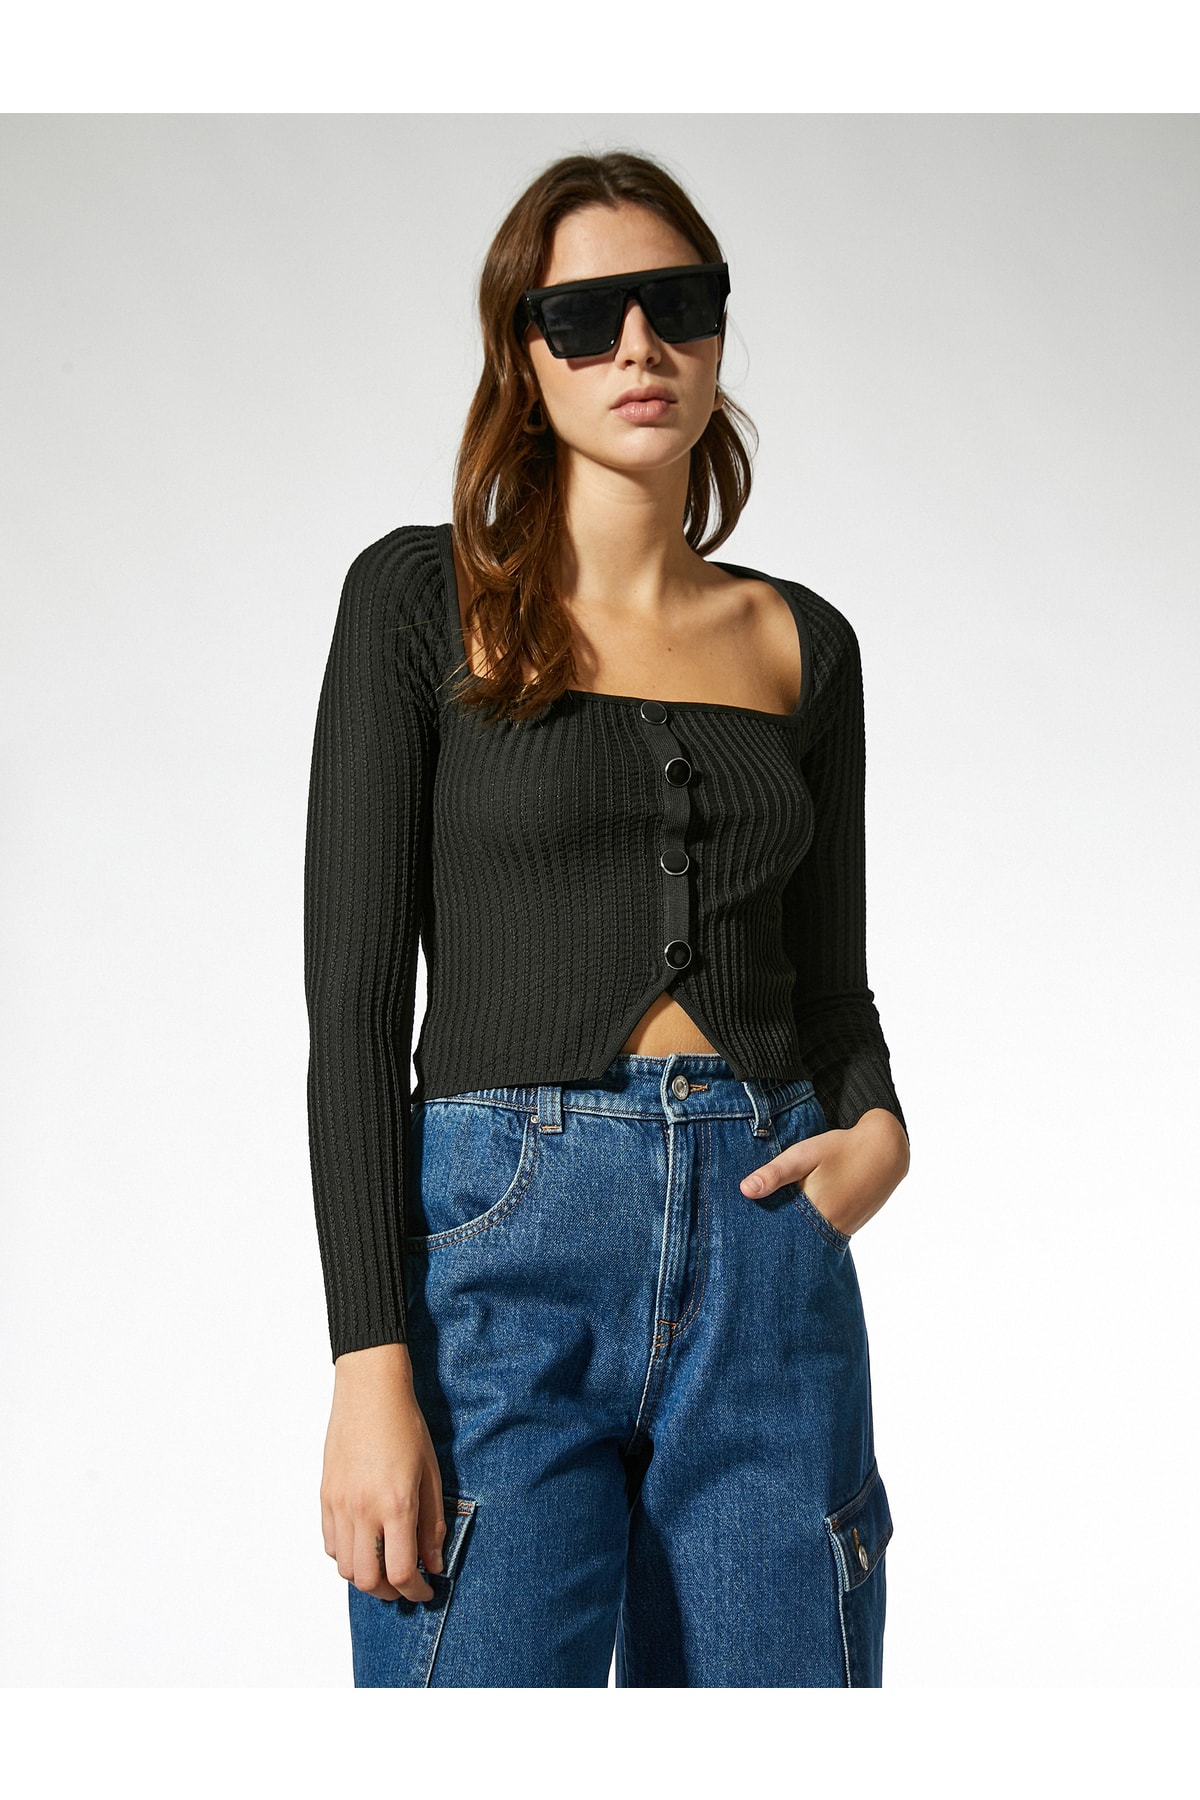 Koton Square Neck Buttoned Knitwear Sweater